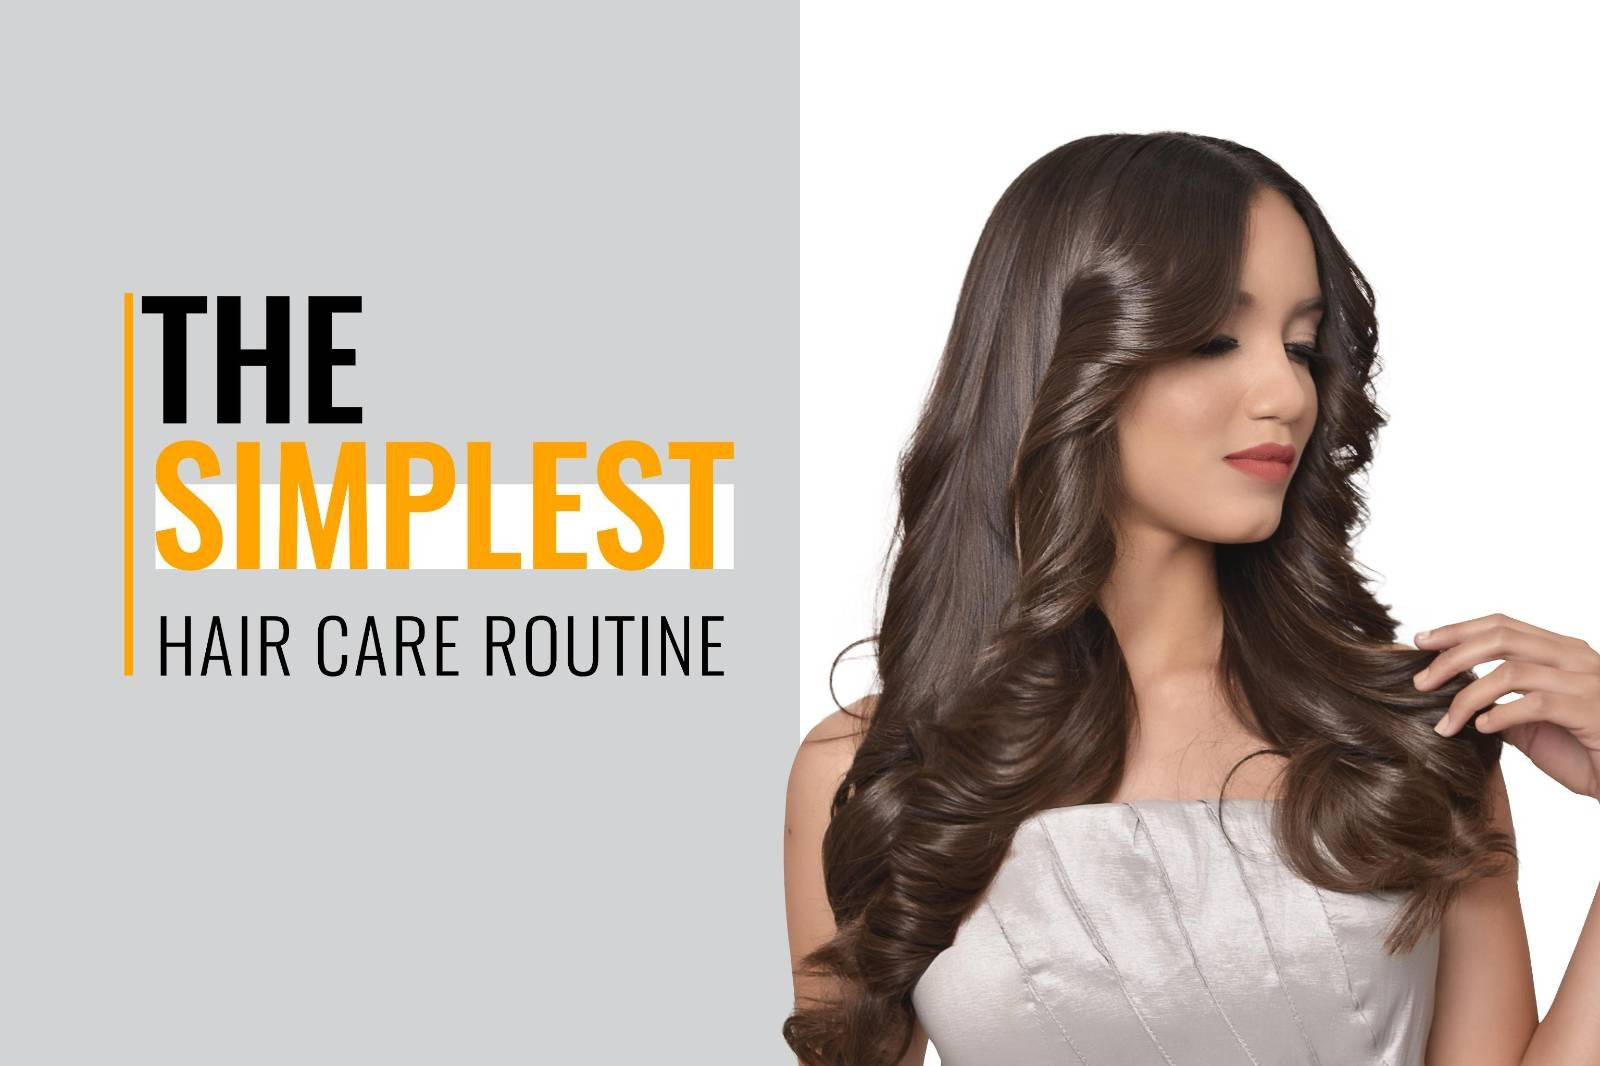 Hair Care Routine Get Rid Of Dandruff And Hairfall